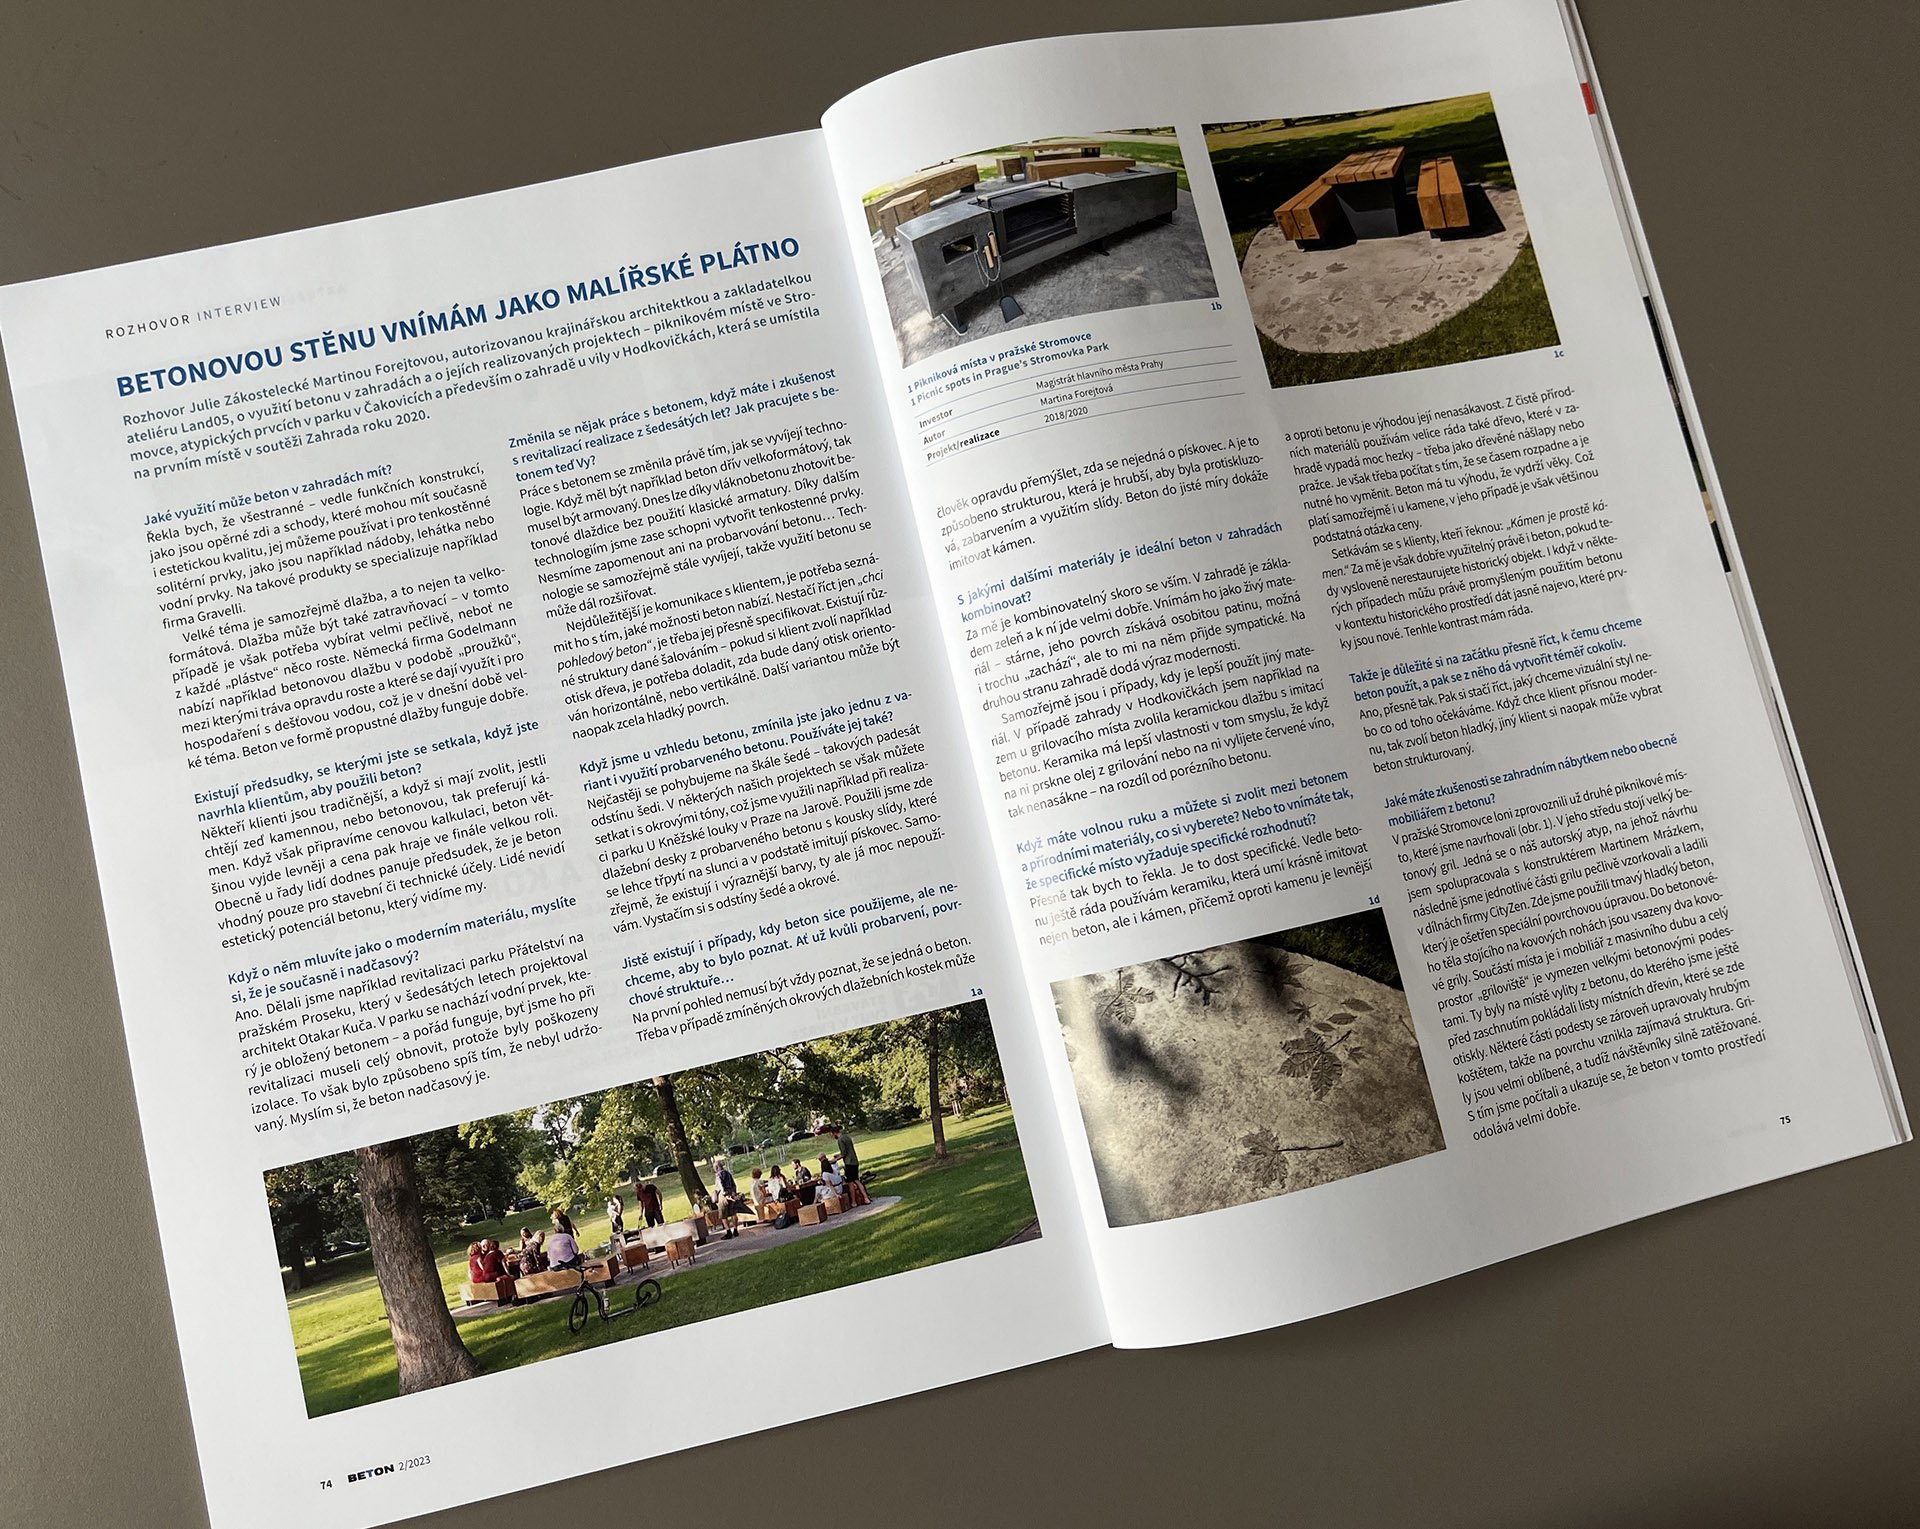 An Interview with Martina Forejtová in Beton Magazine 6/2023 - About using concrete in landscape projects